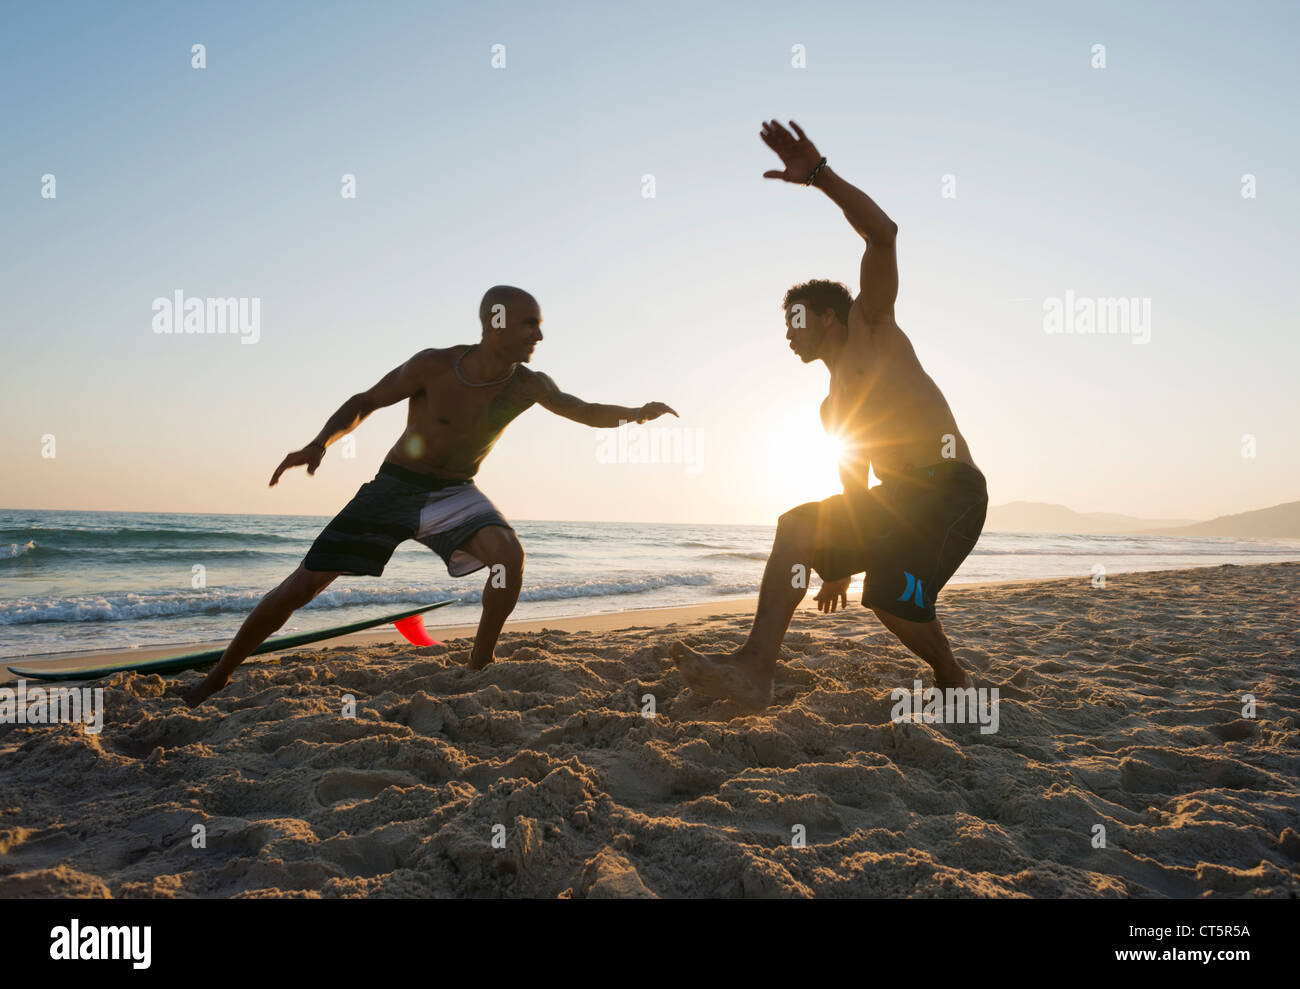 Men playing at the beach. Stock Photo